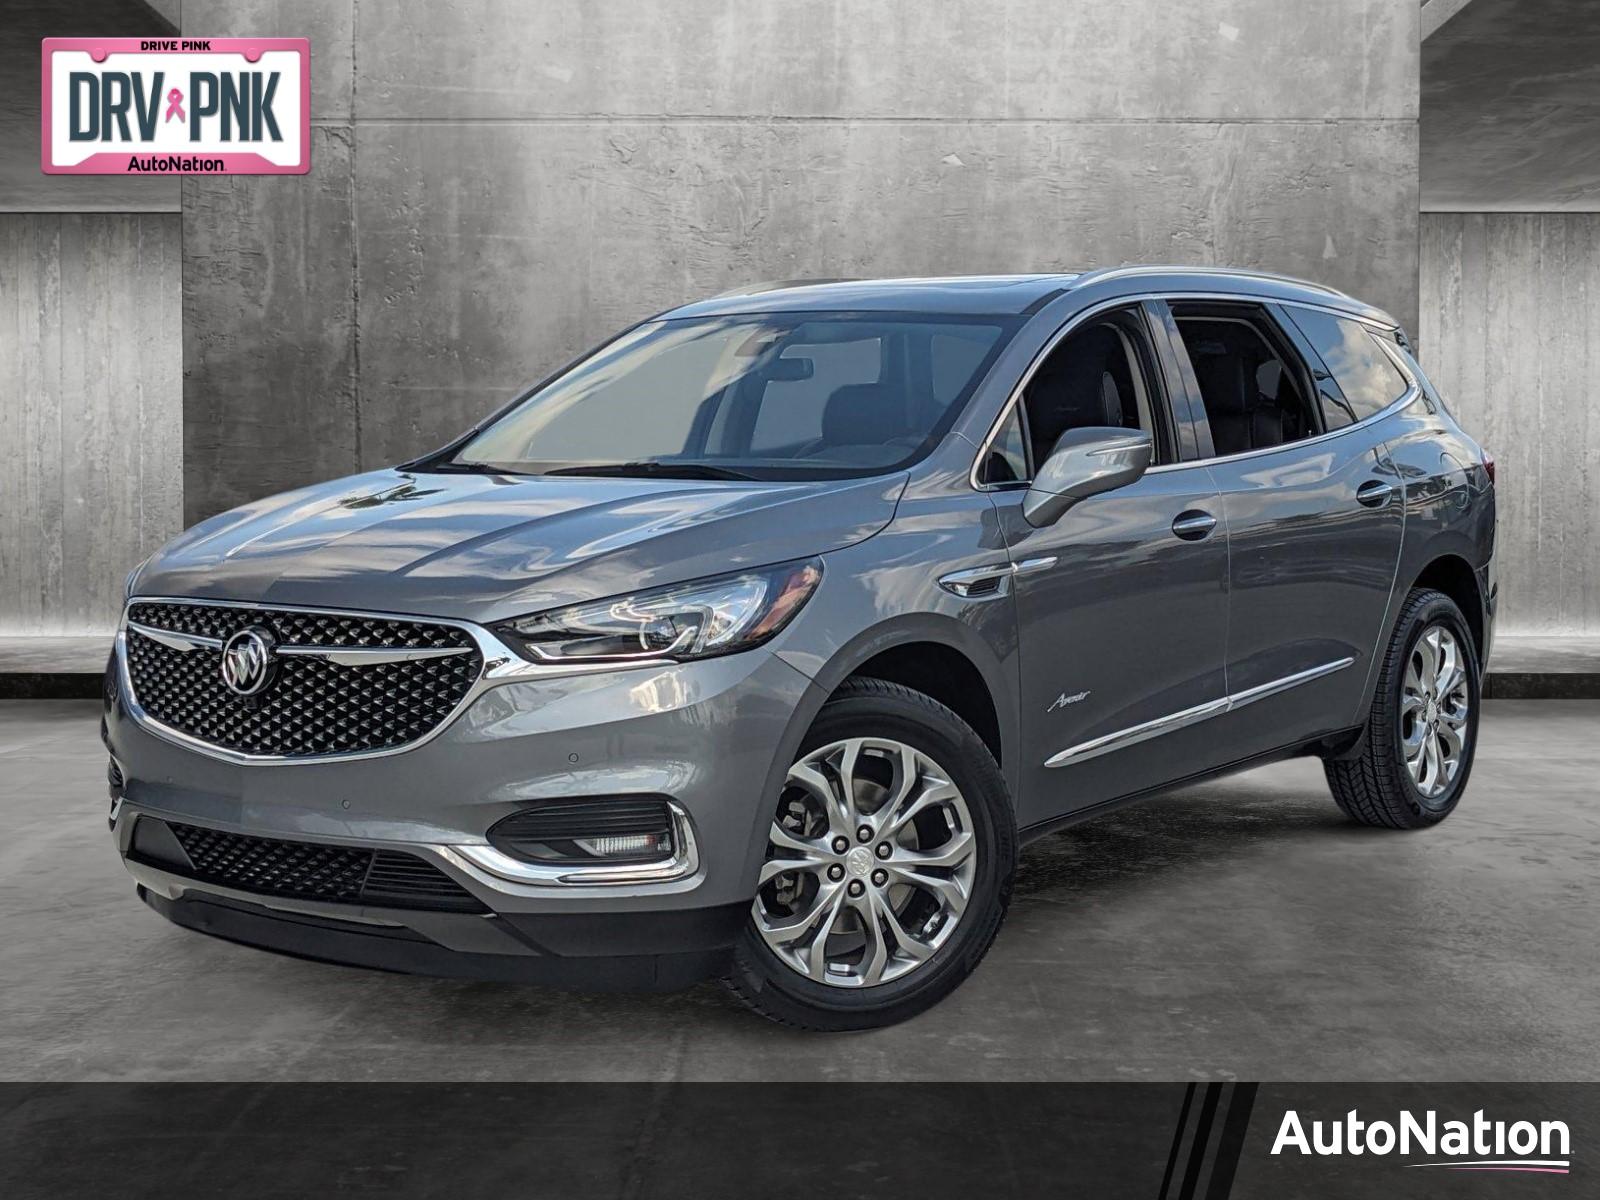 2019 Buick Enclave Vehicle Photo in Hollywood, FL 33021